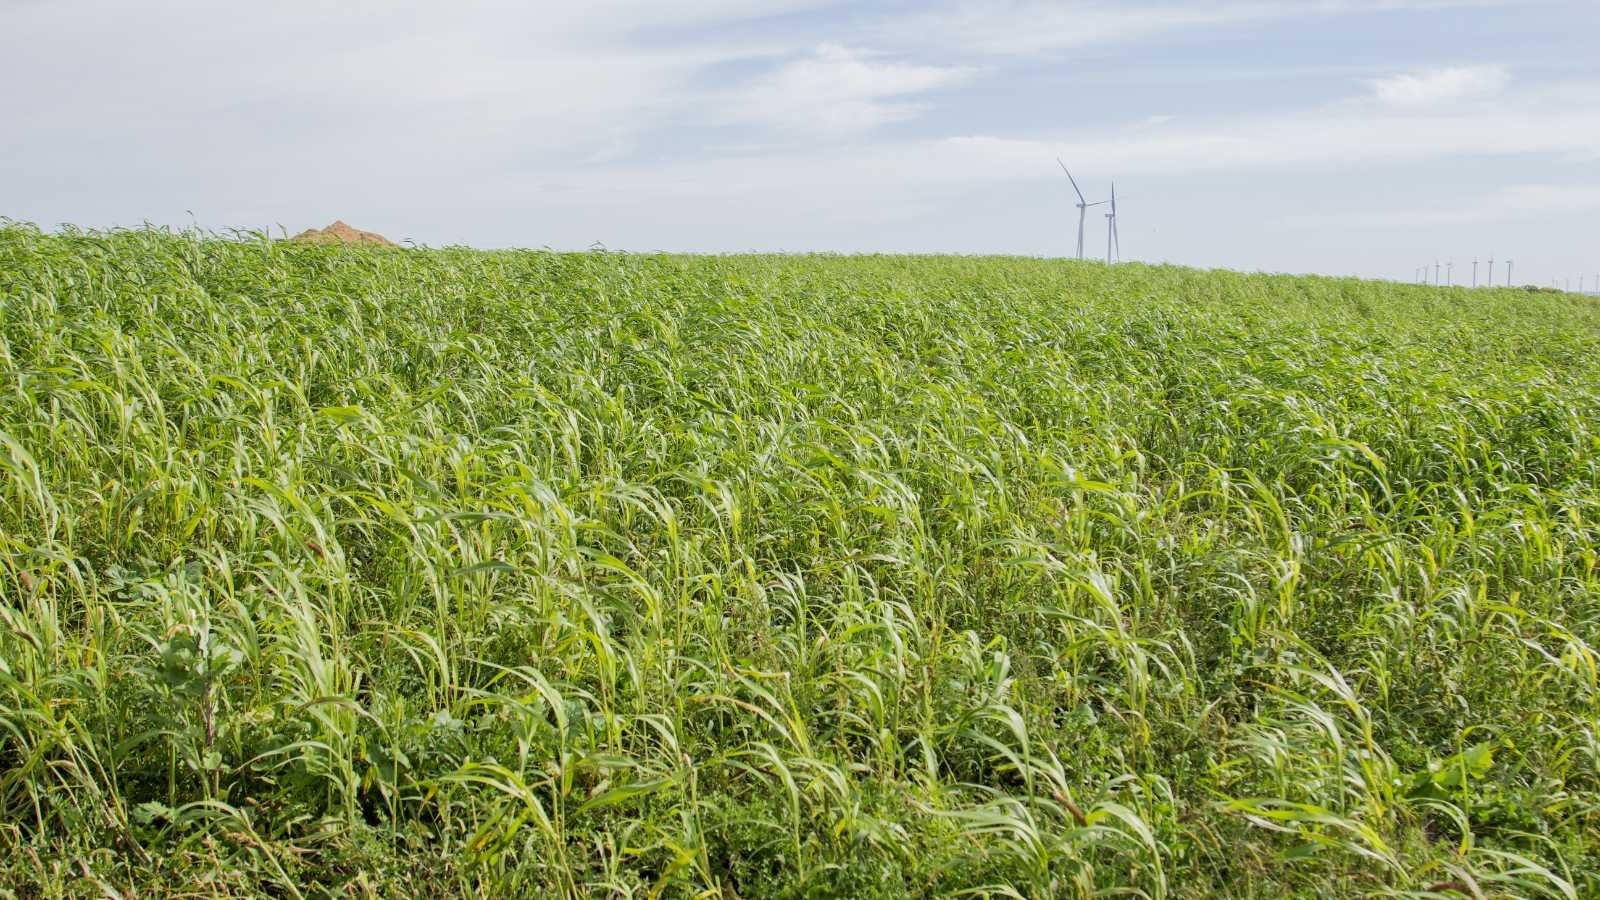 Cover cropping reduces mono-crops that can negatively impact land use